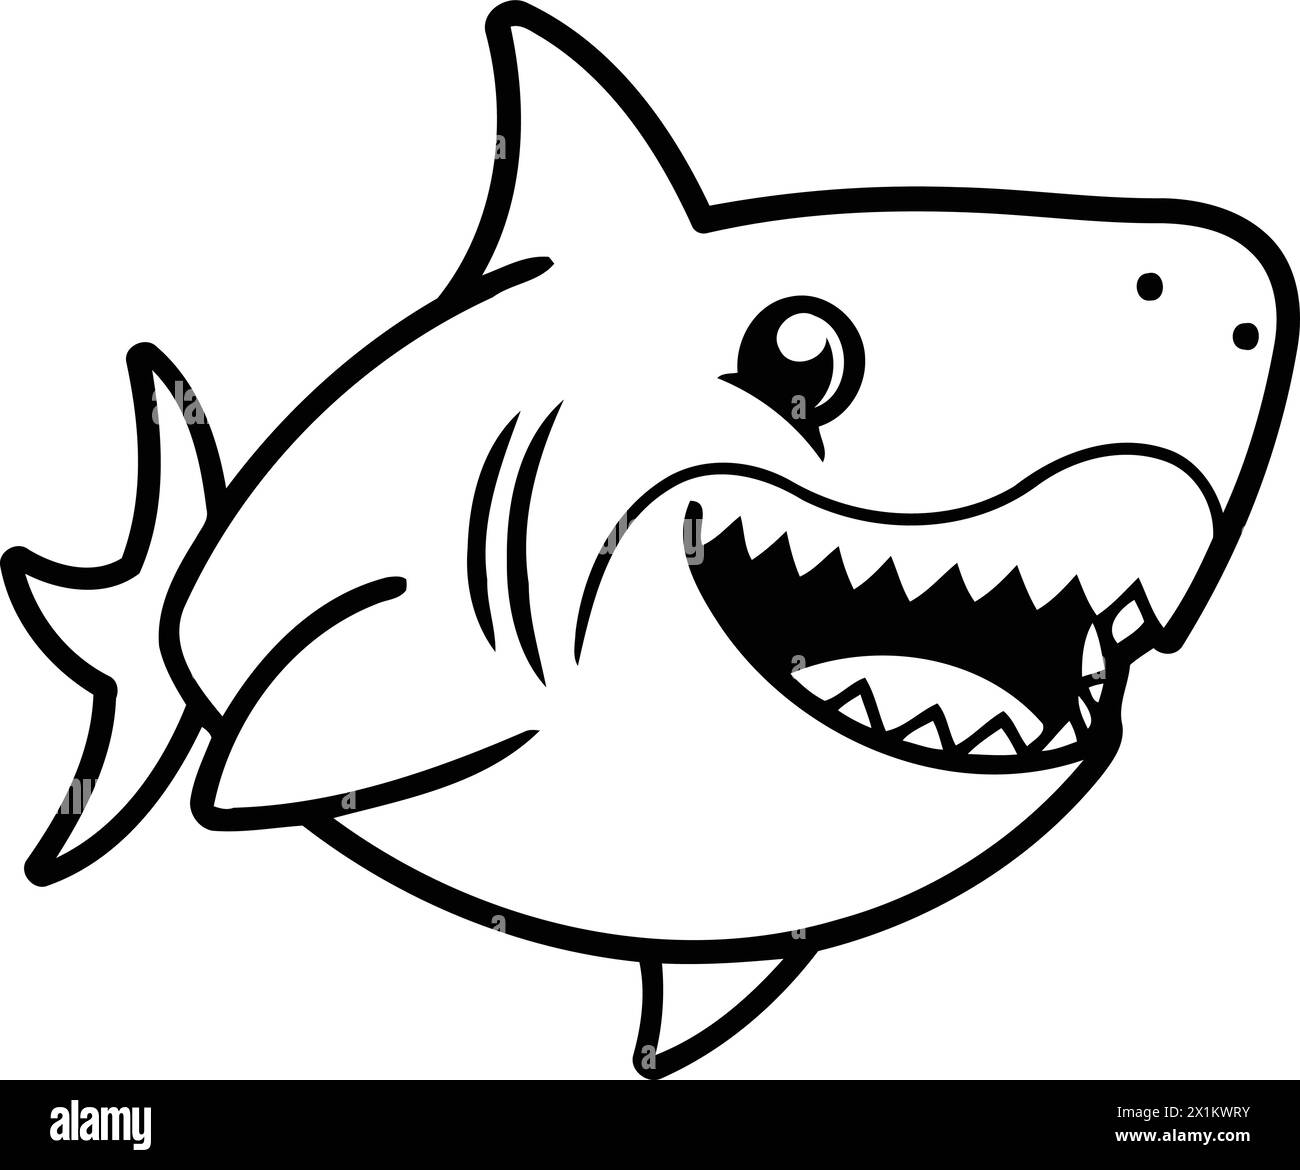 Cartoon shark icon. Vector illustration isolated on a white background ...